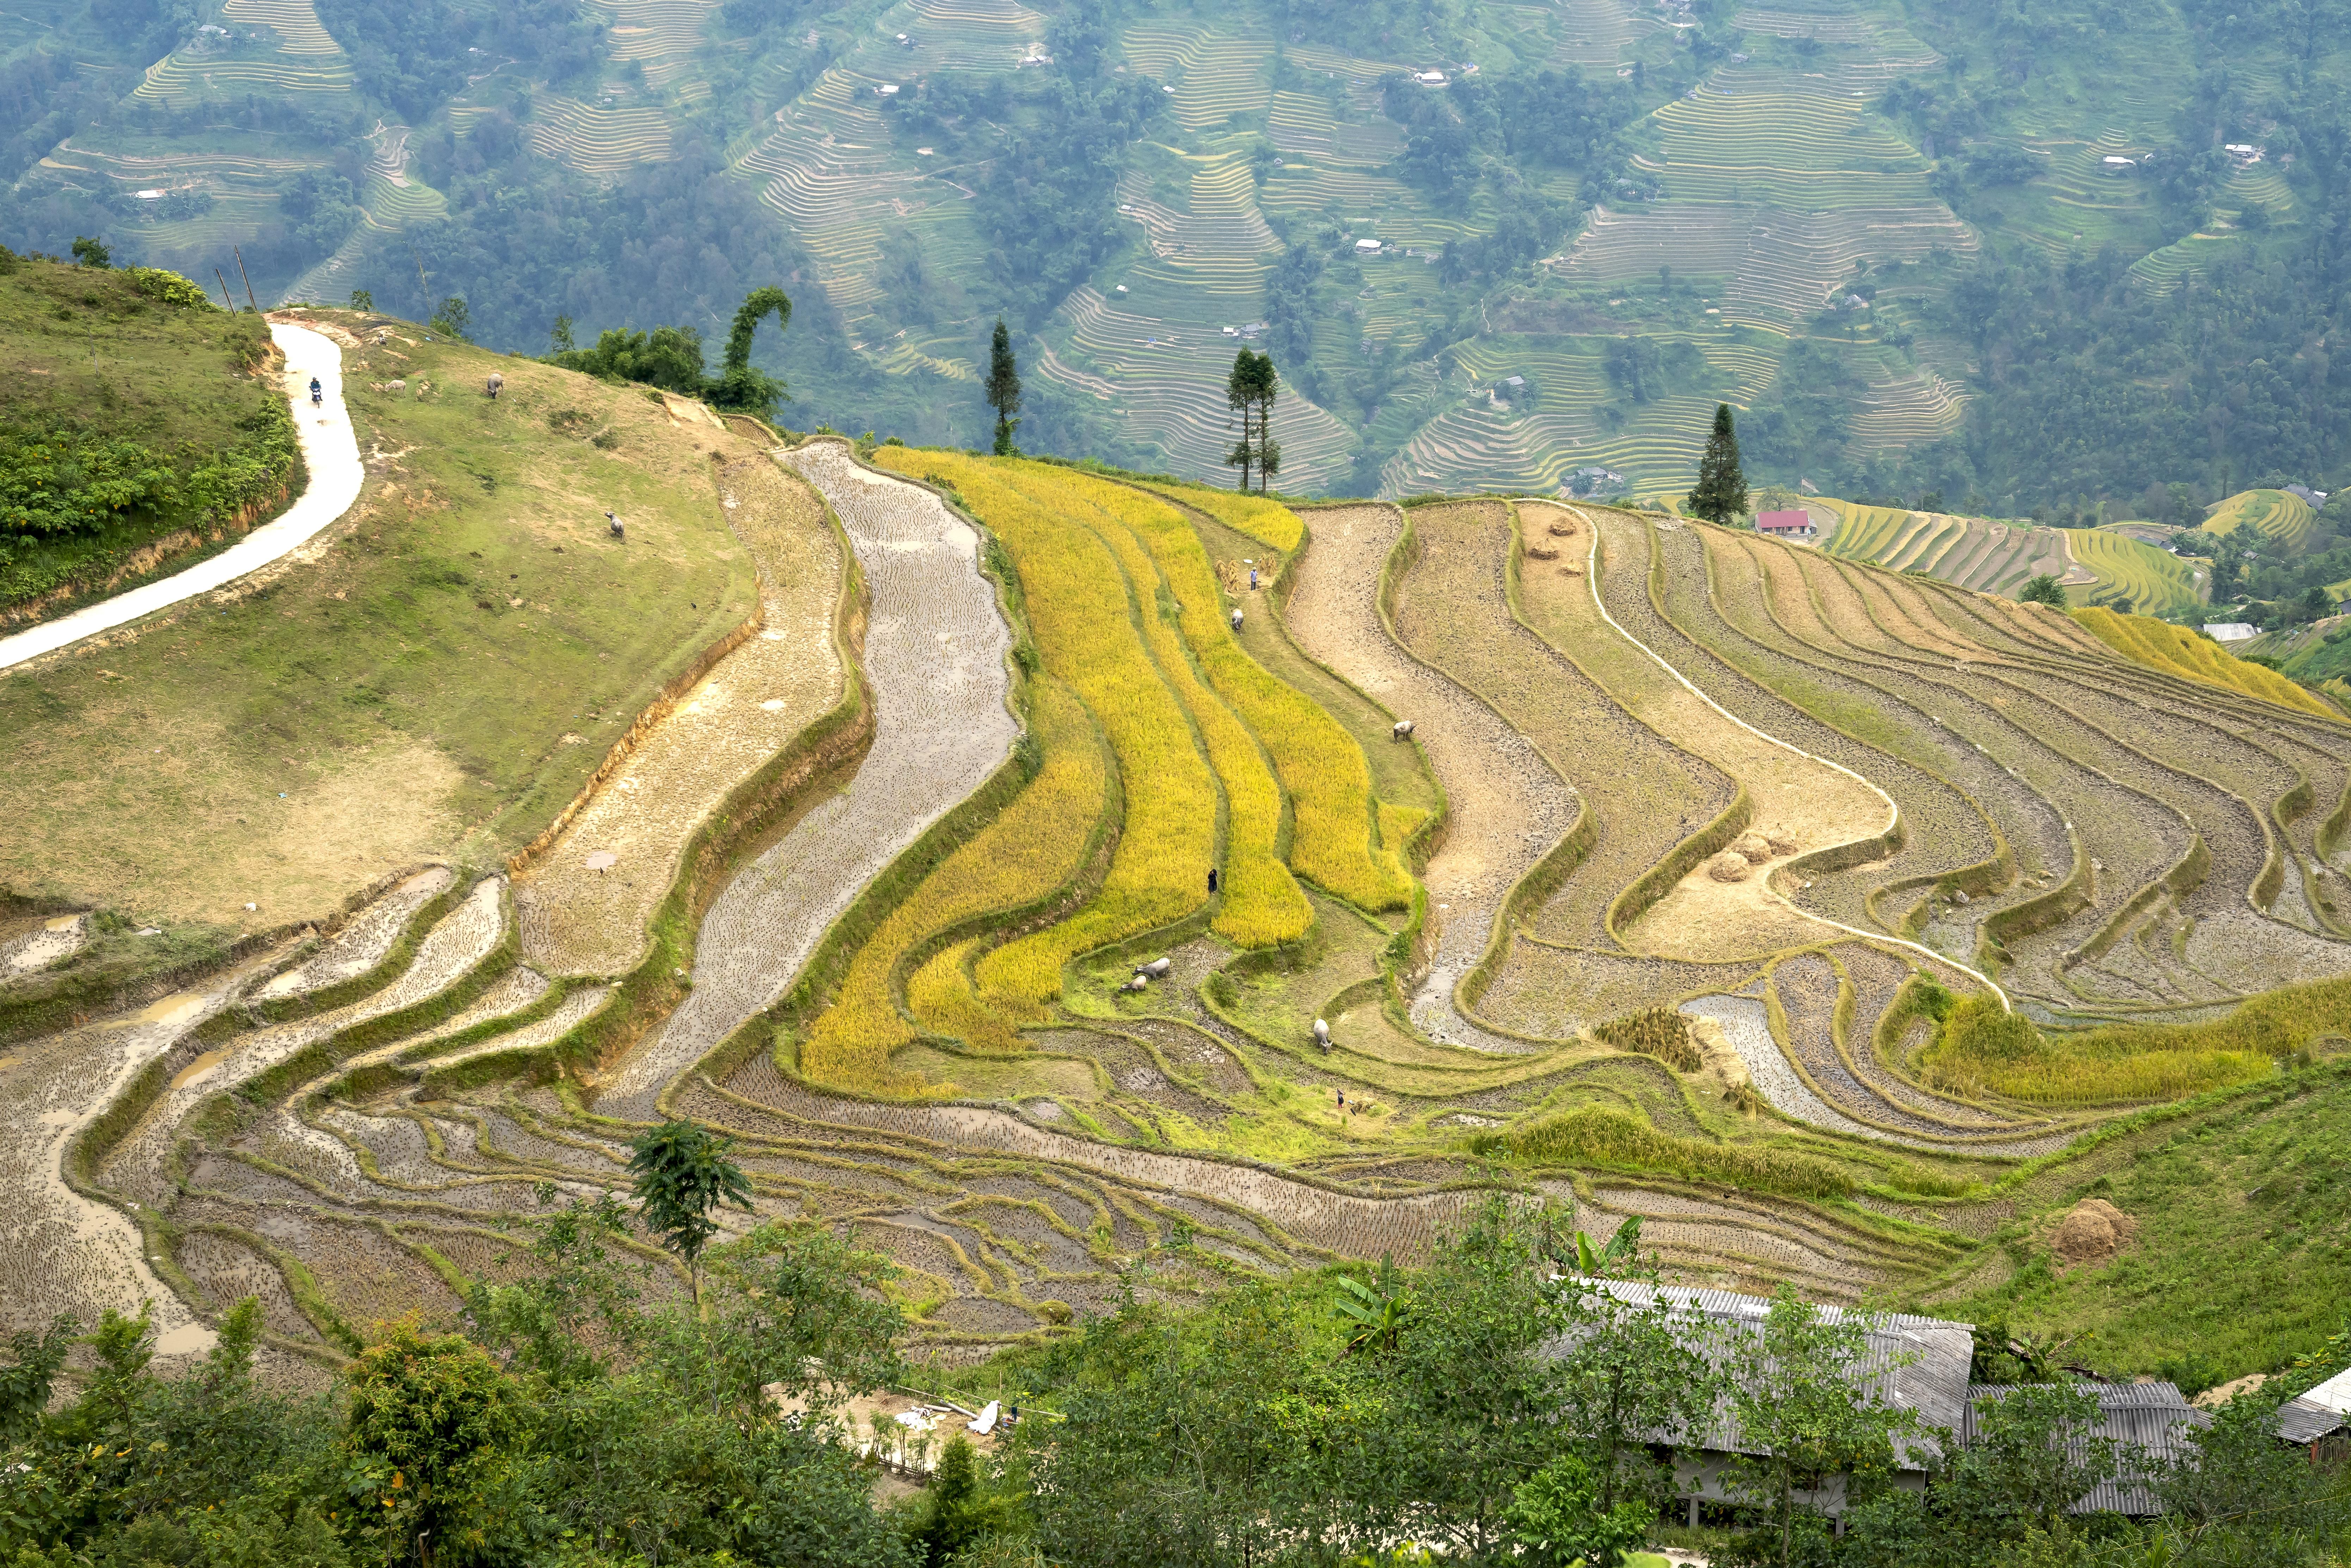 Why is terrace farming practiced in hilly areas? 